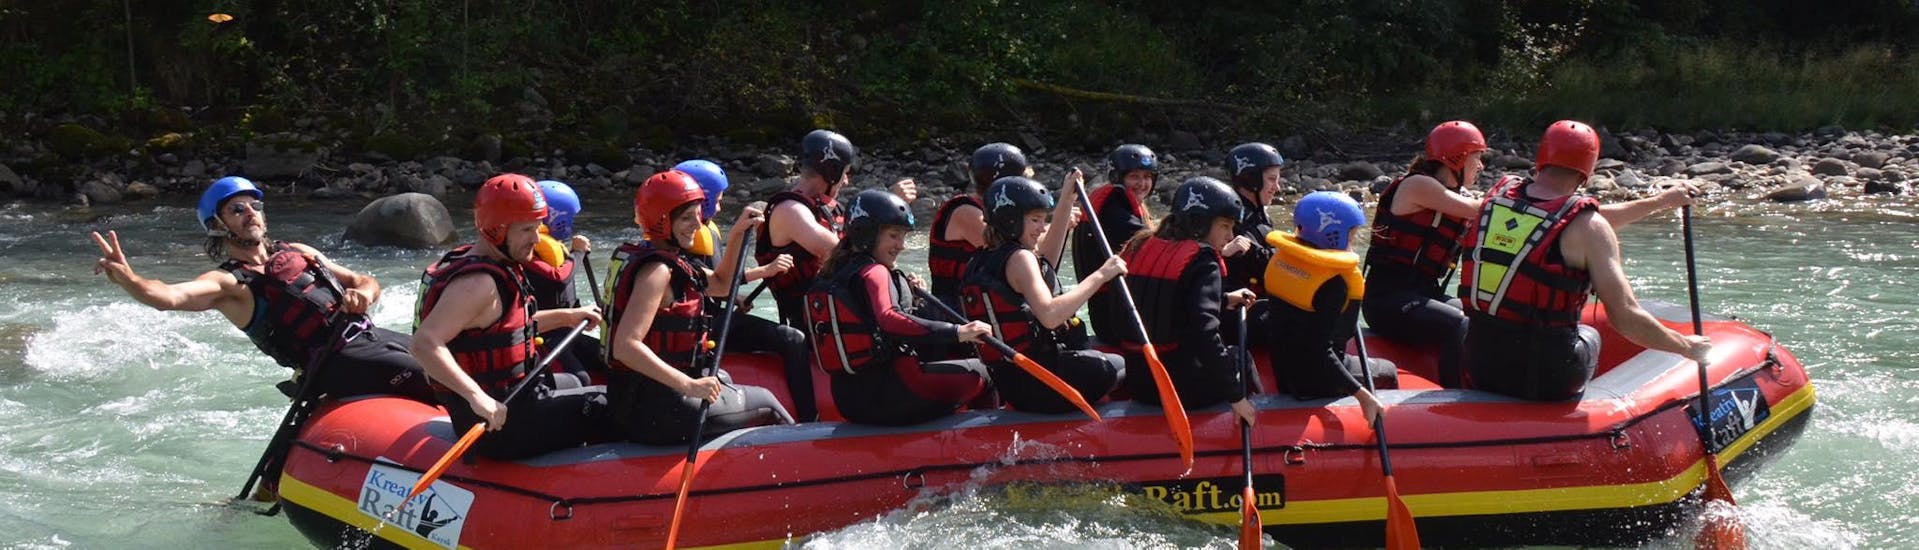 rafting-on-rienza-for-groups15-40-ppl-action- safety-kreativraft-hero